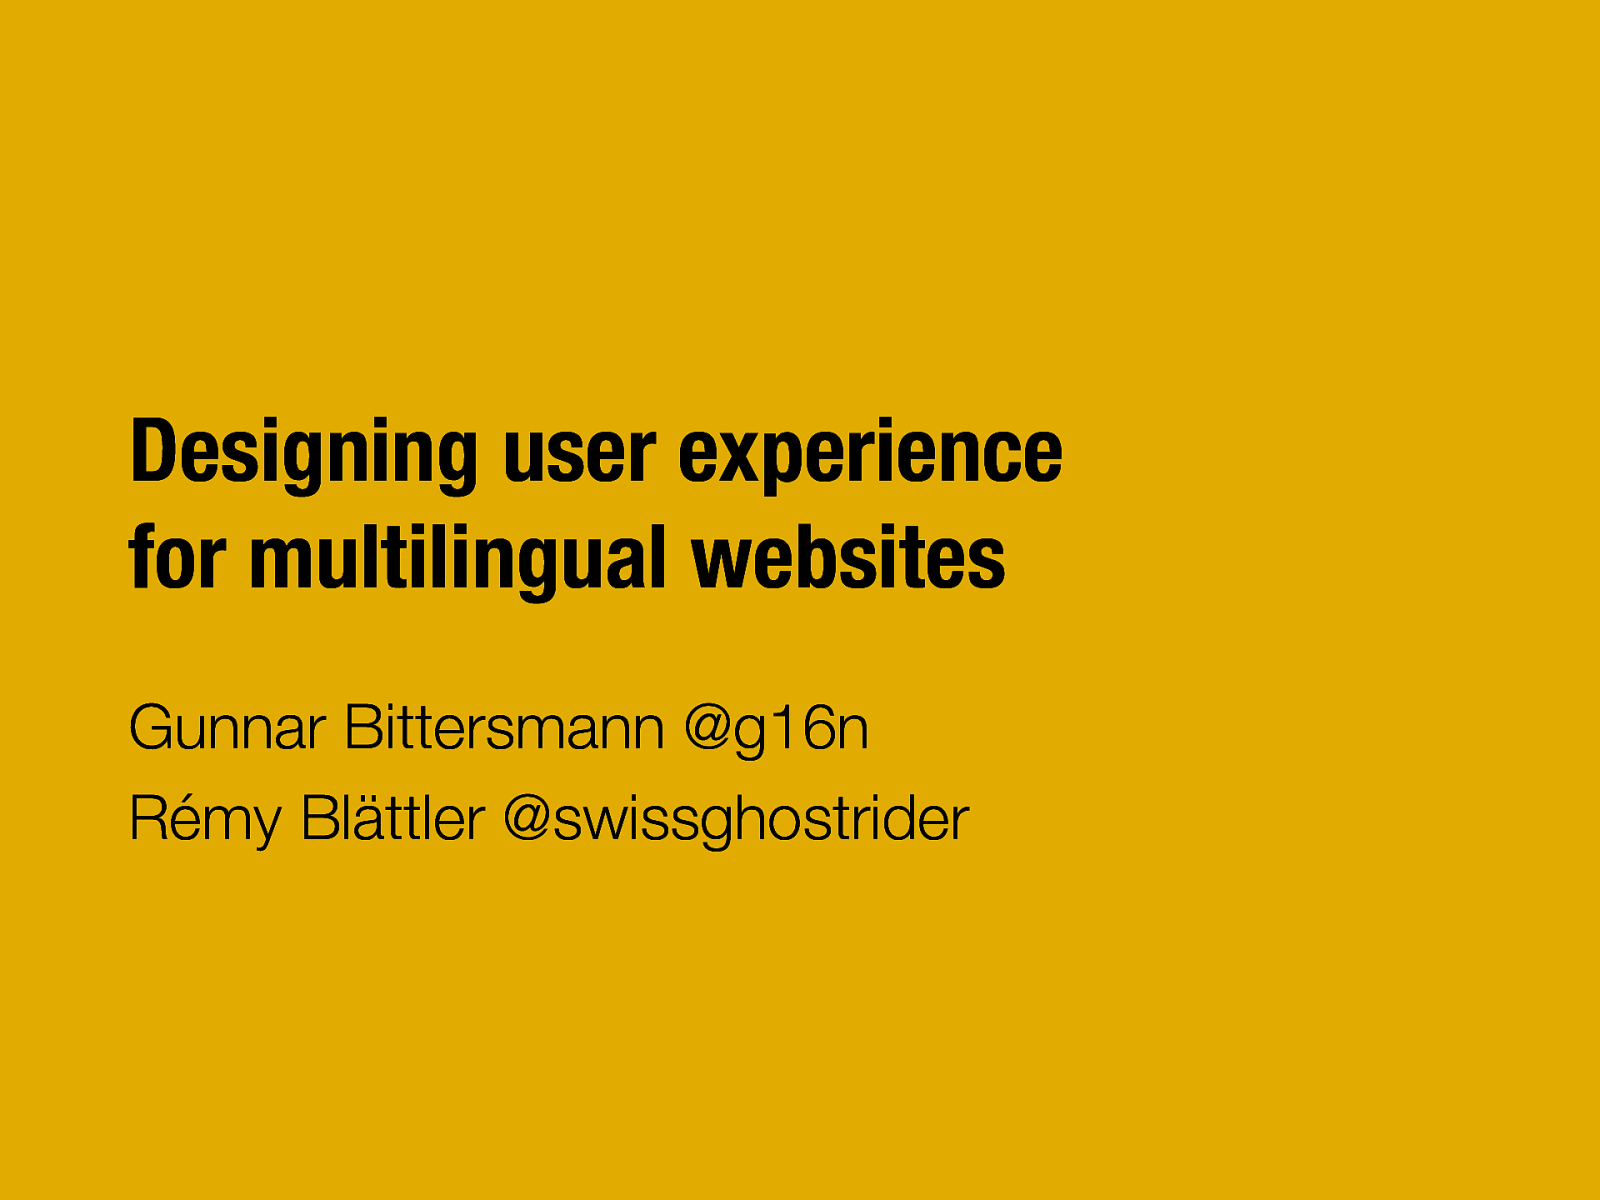 Designing user experience for multilingual websites